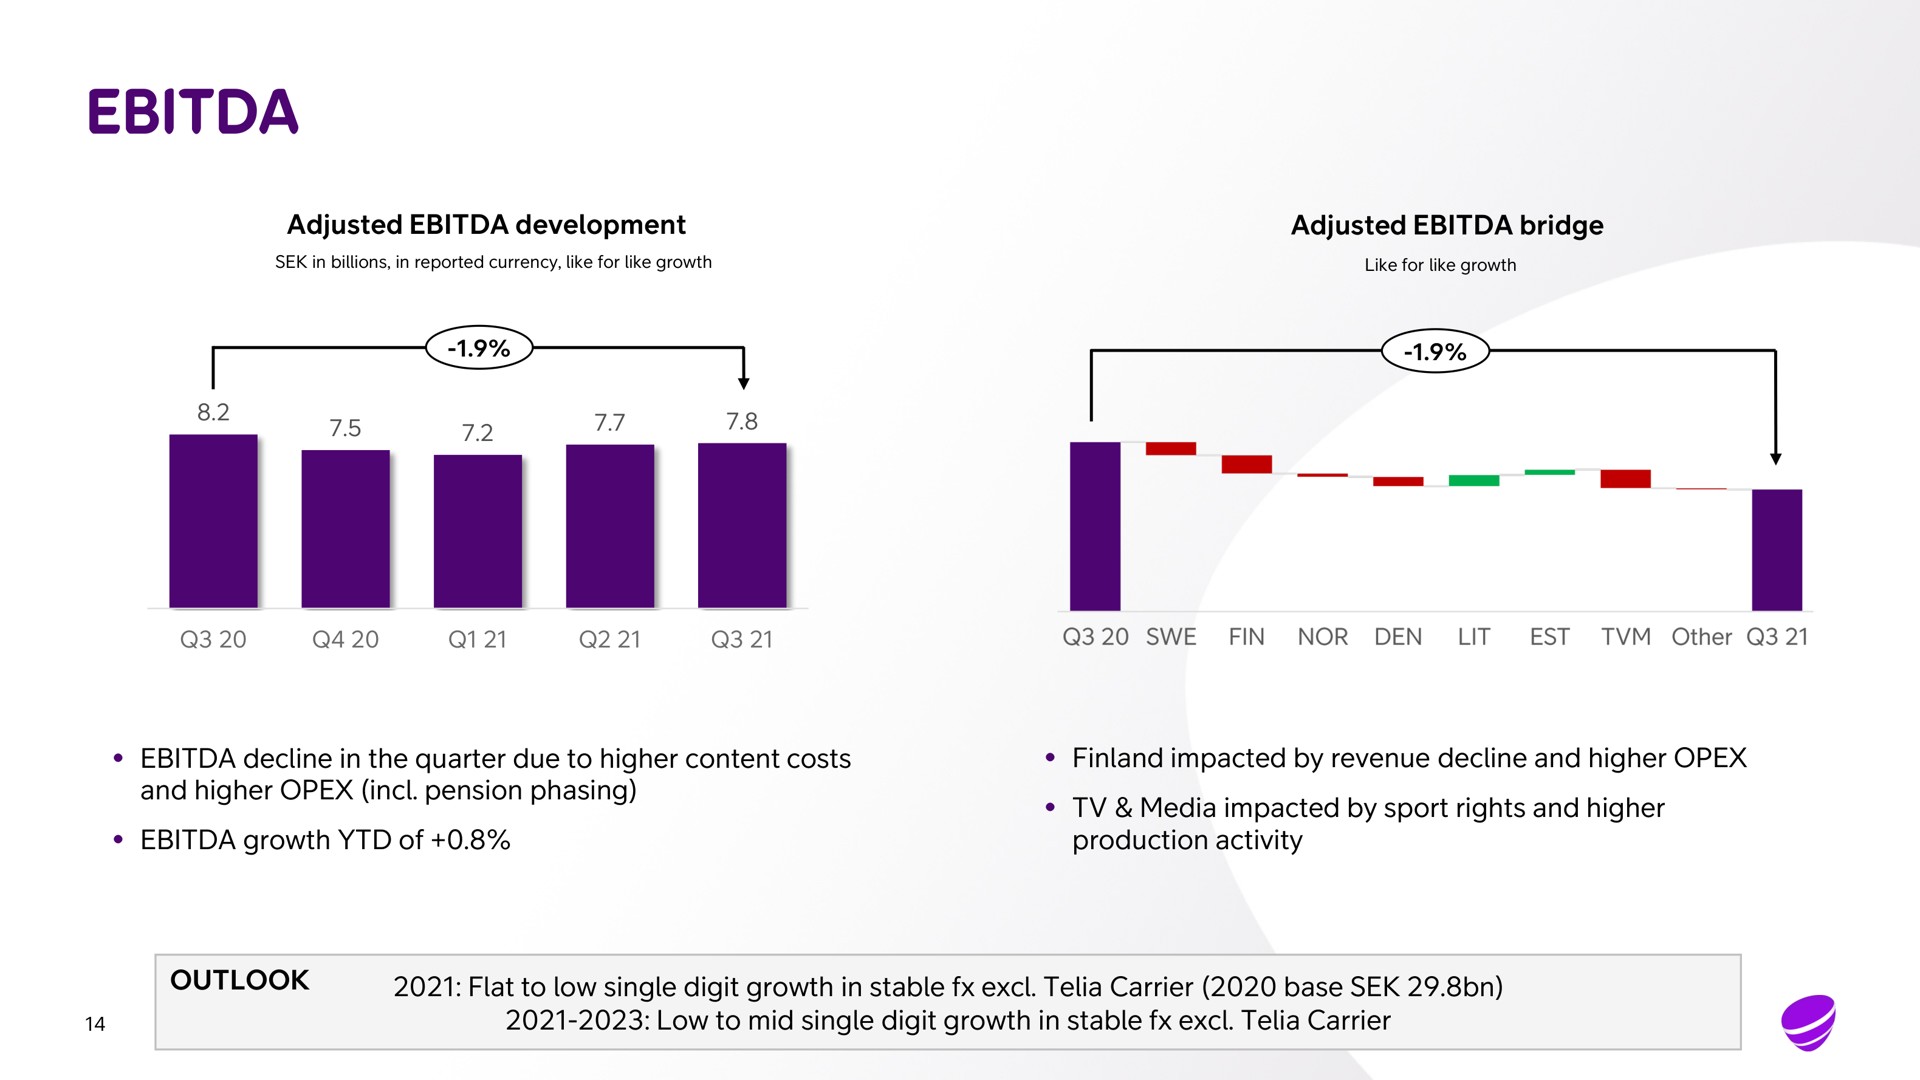 adjusted development adjusted bridge decline in the quarter due to higher content costs finland impacted by revenue decline and higher and higher pension phasing growth of media impacted by sport rights and higher production activity outlook flat to low single digit growth in stable carrier base low to mid single digit growth in stable carrier a | Telia Company